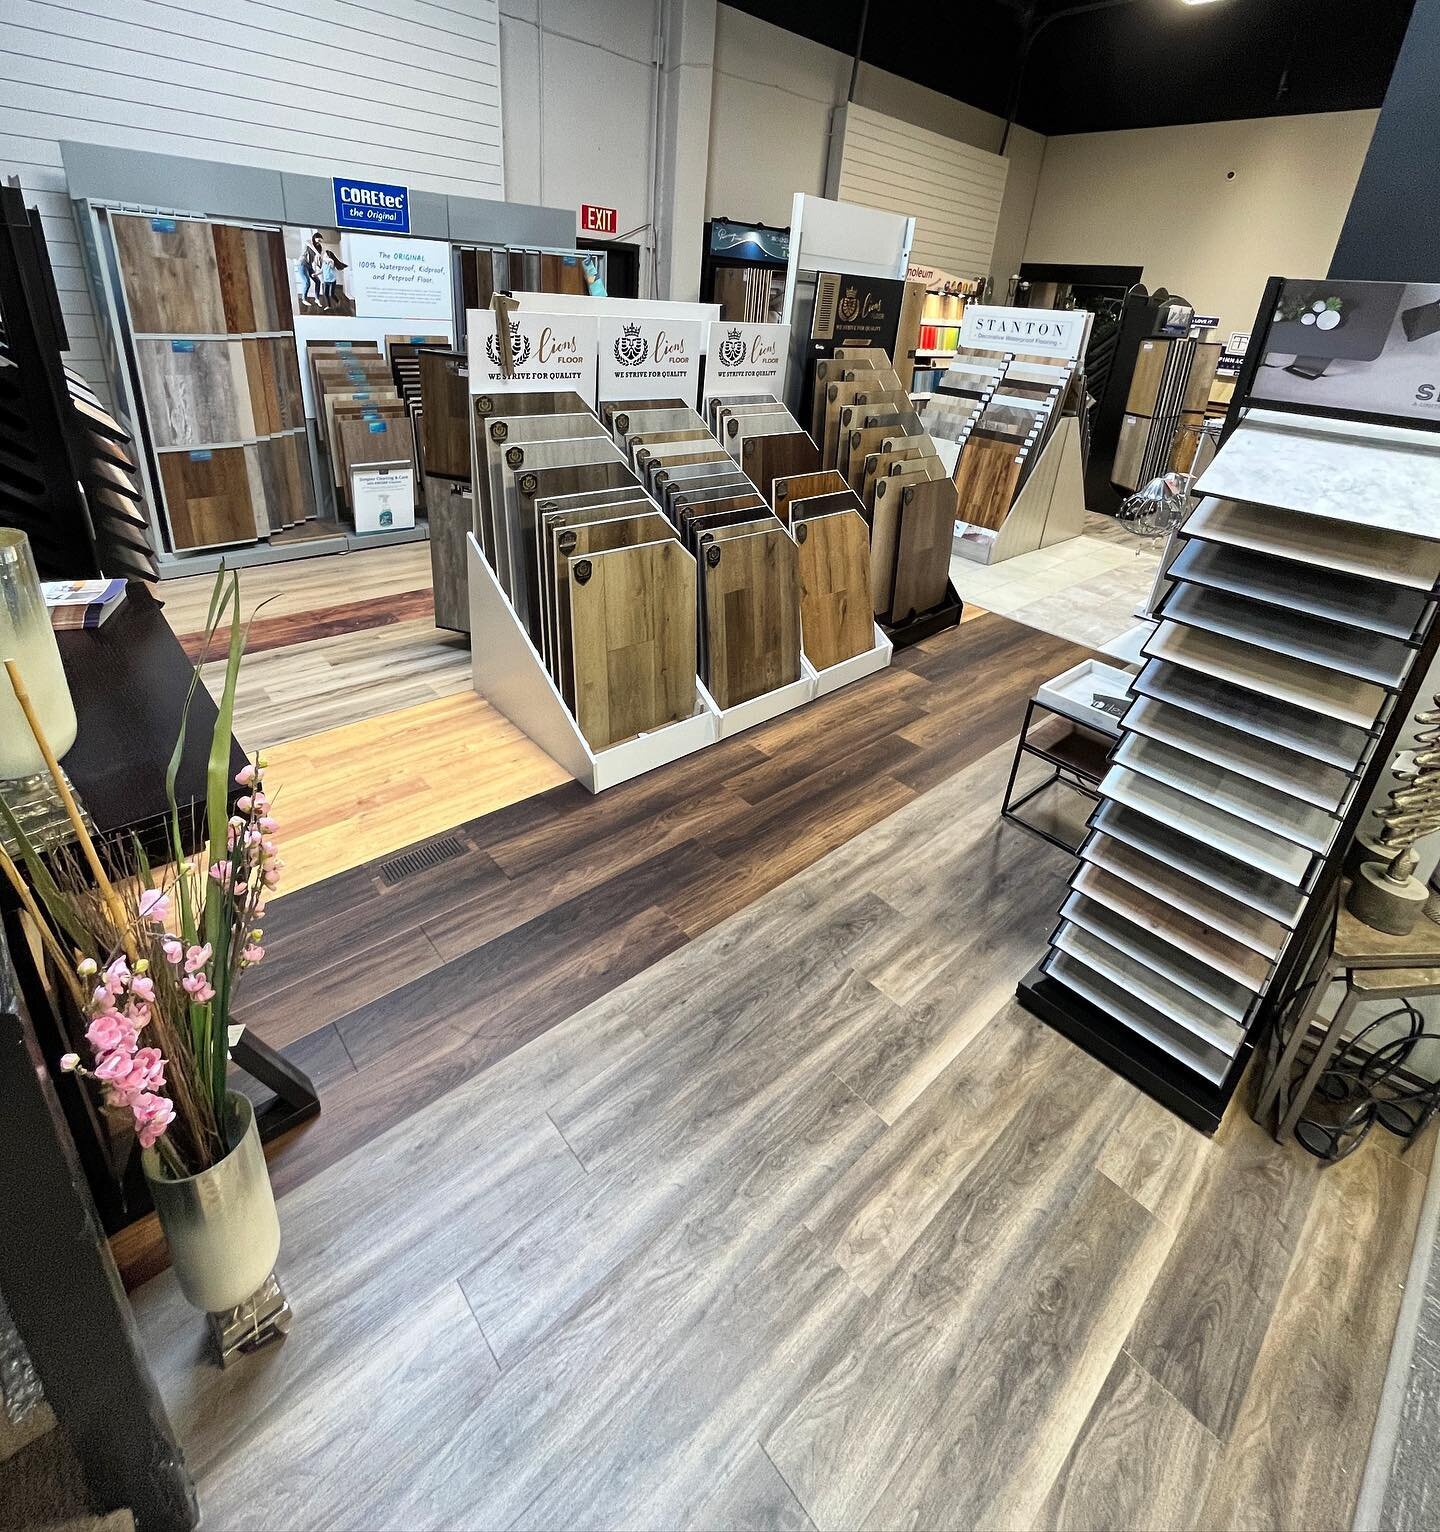 Have you stopped in lately to see what&rsquo;s new? Luxury Vinyl Flooring is quickly extending the footprint in our store. Pets, kids, water prone areas, and high traffic, this floor is for you!
#luxuryvinyl #flooring #lvp #lvt #vinylplank #plankfloo